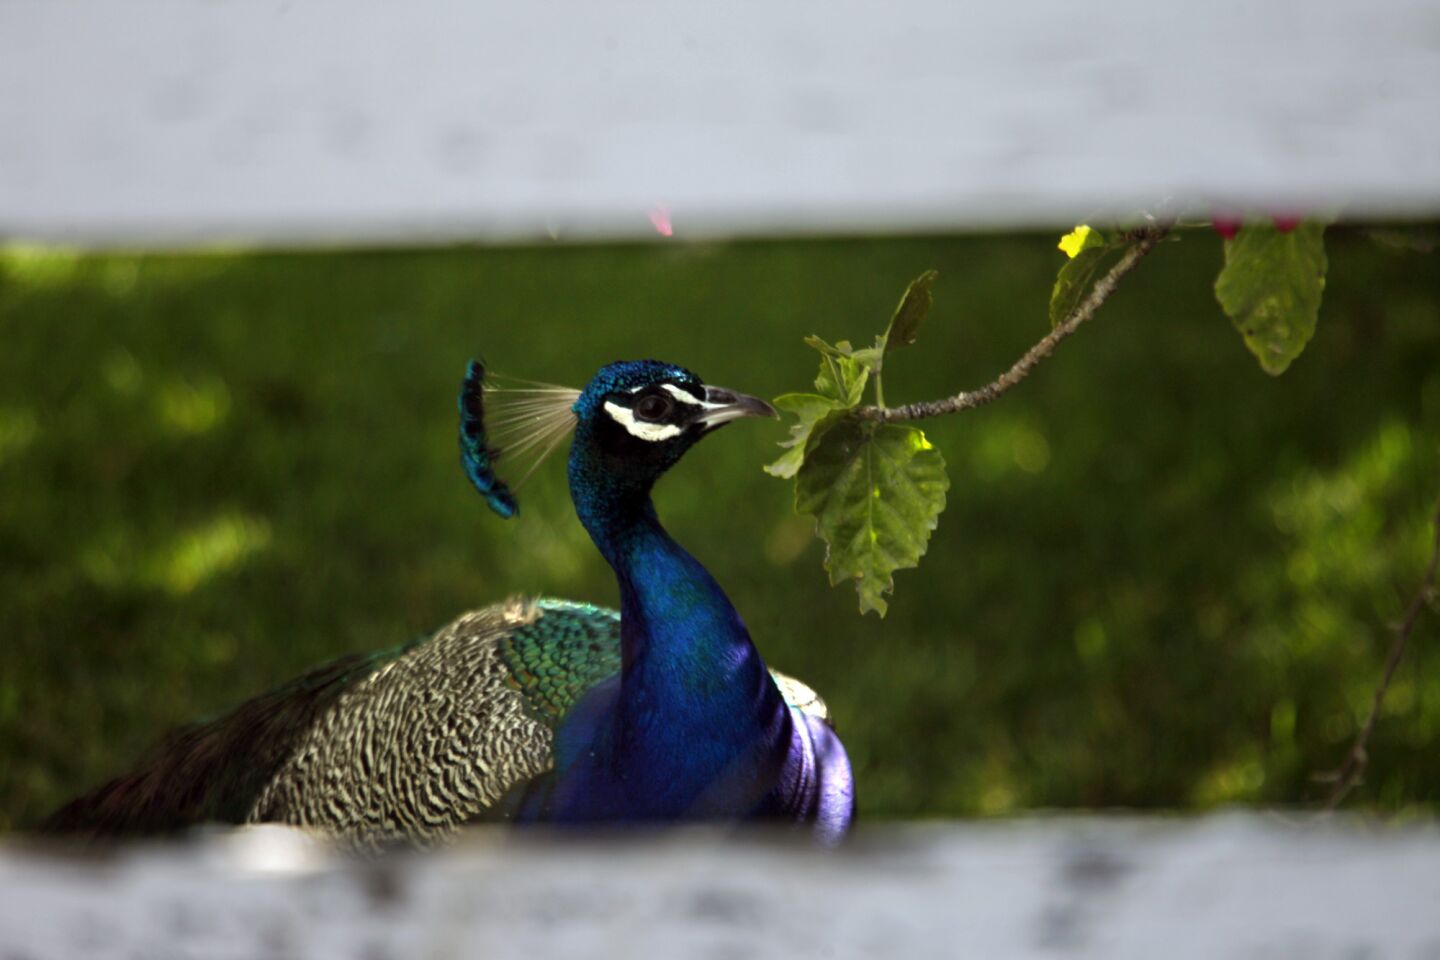 Each peacock killed could bring an animal cruelty penalty of up to three years in prison or a $20,000 fine.